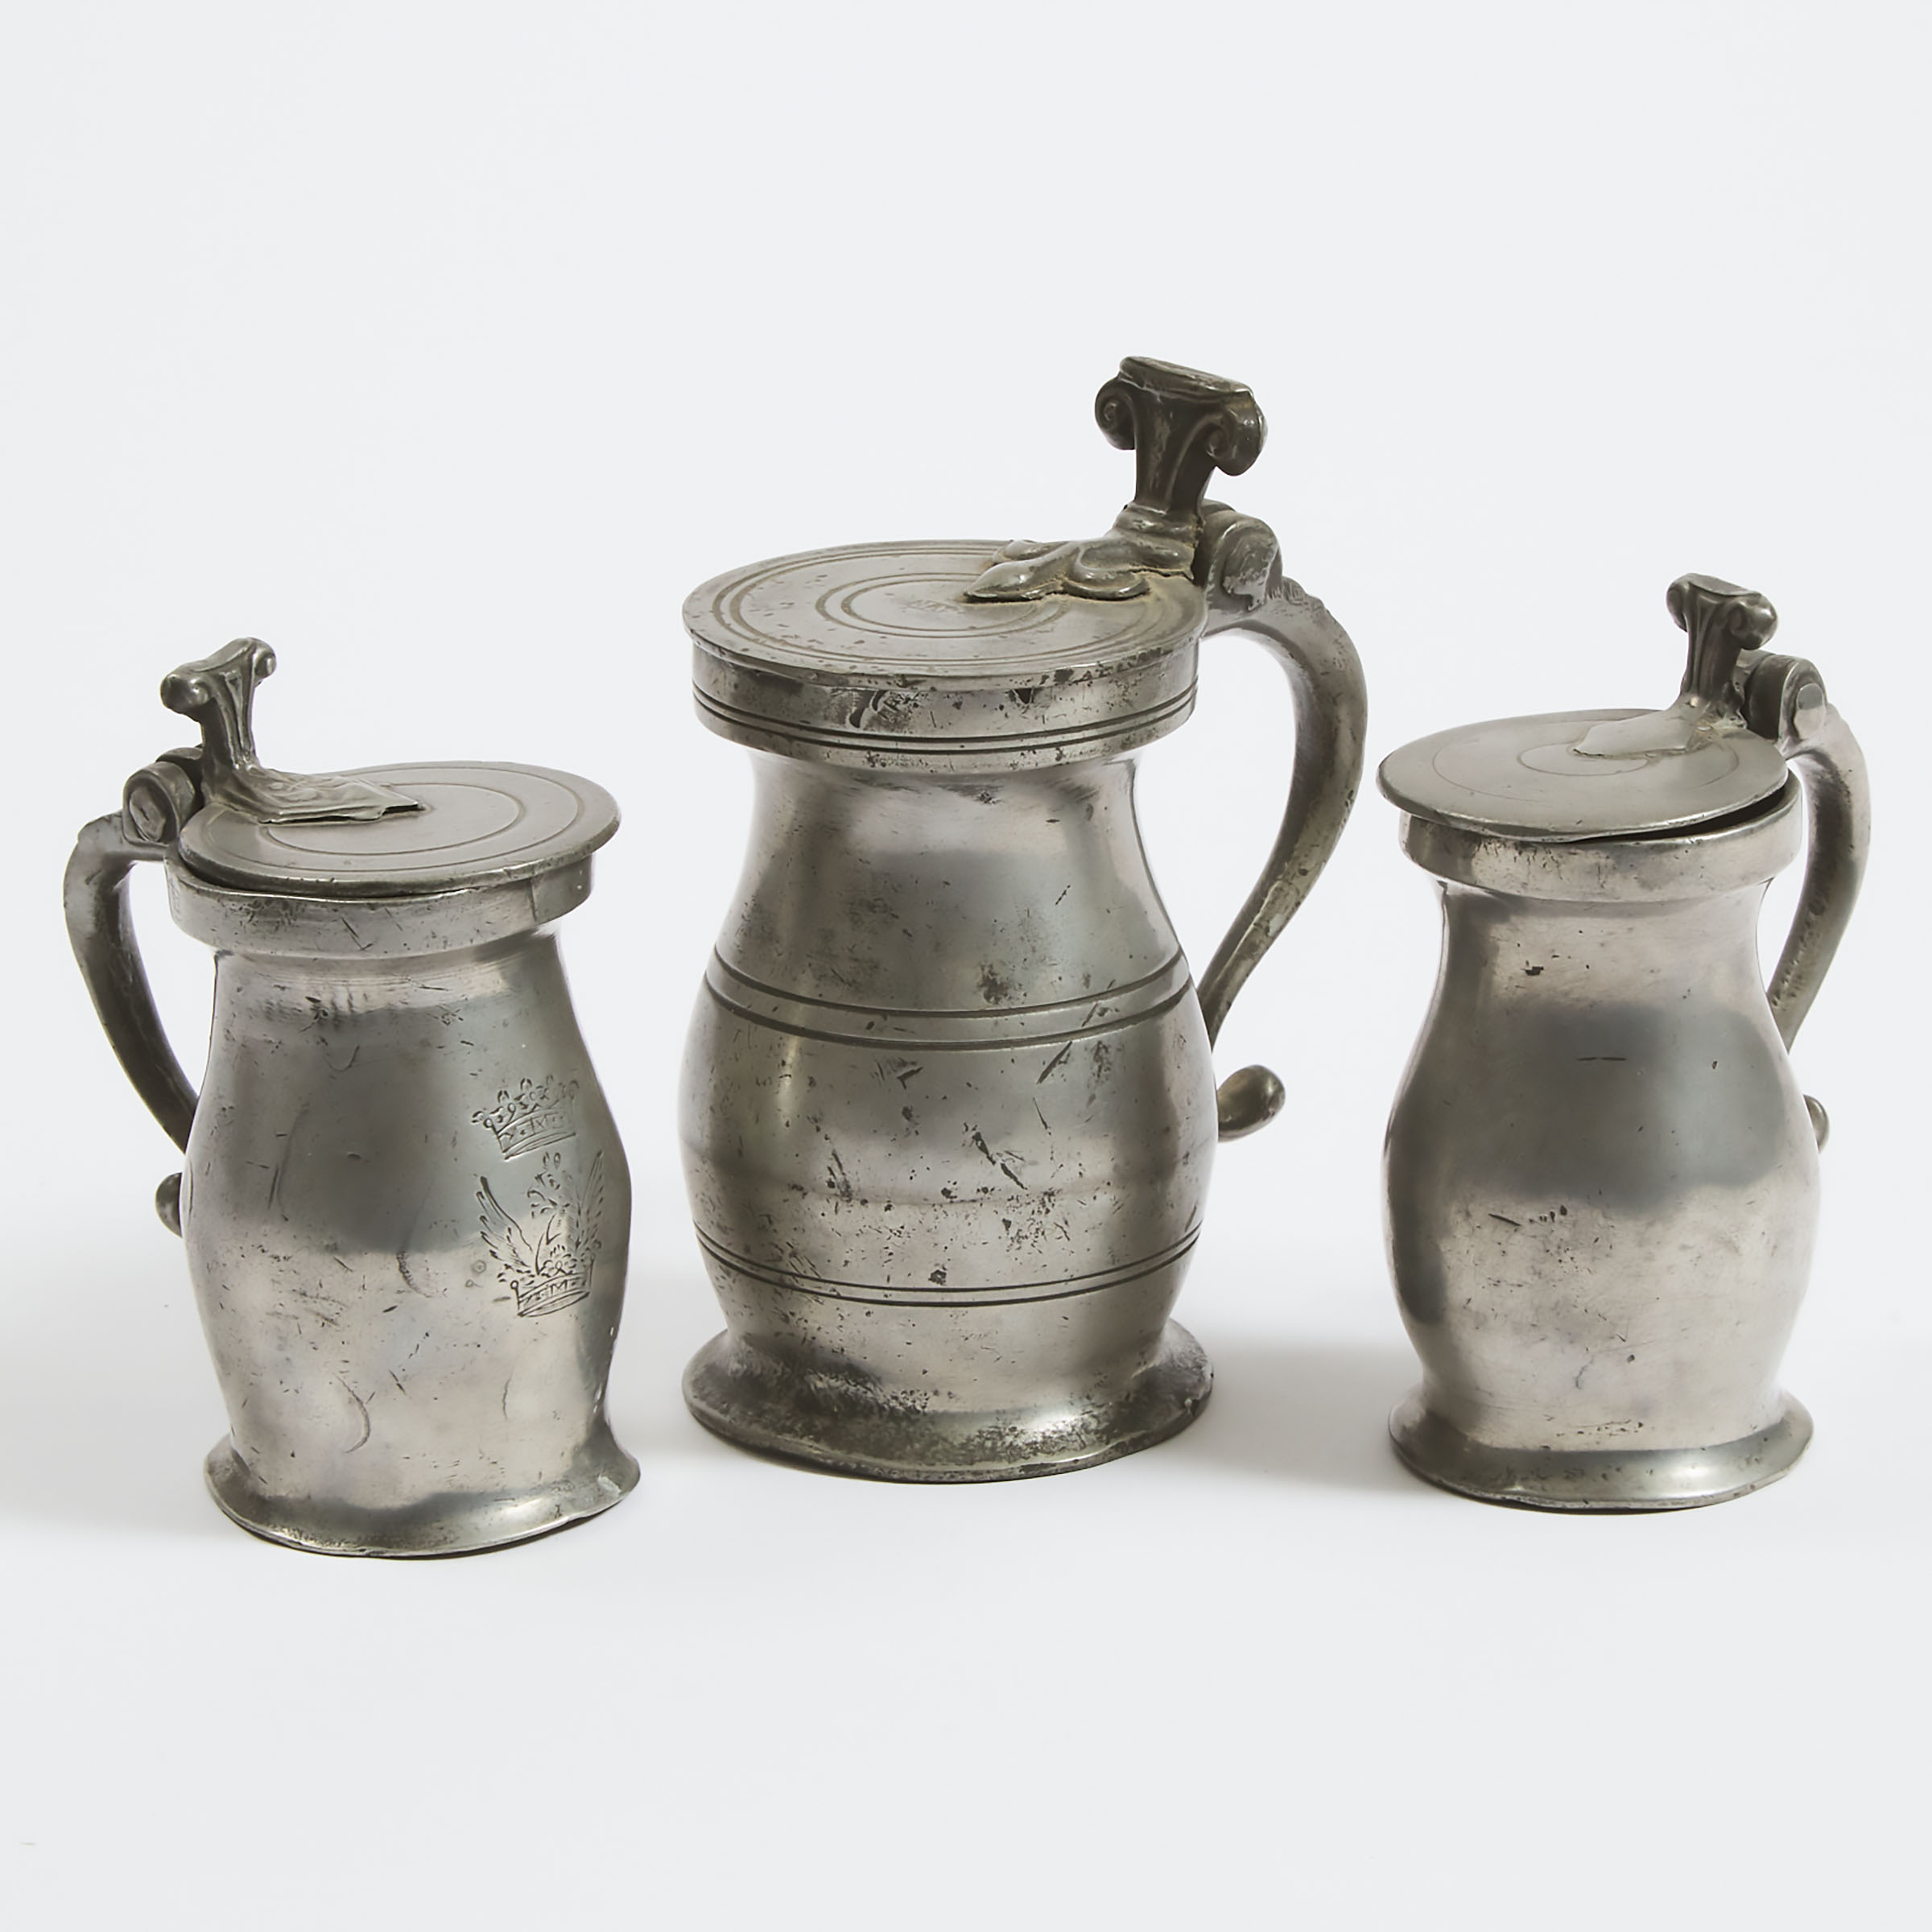 Three English Pewter Baluster Form Wine Measures,18th century